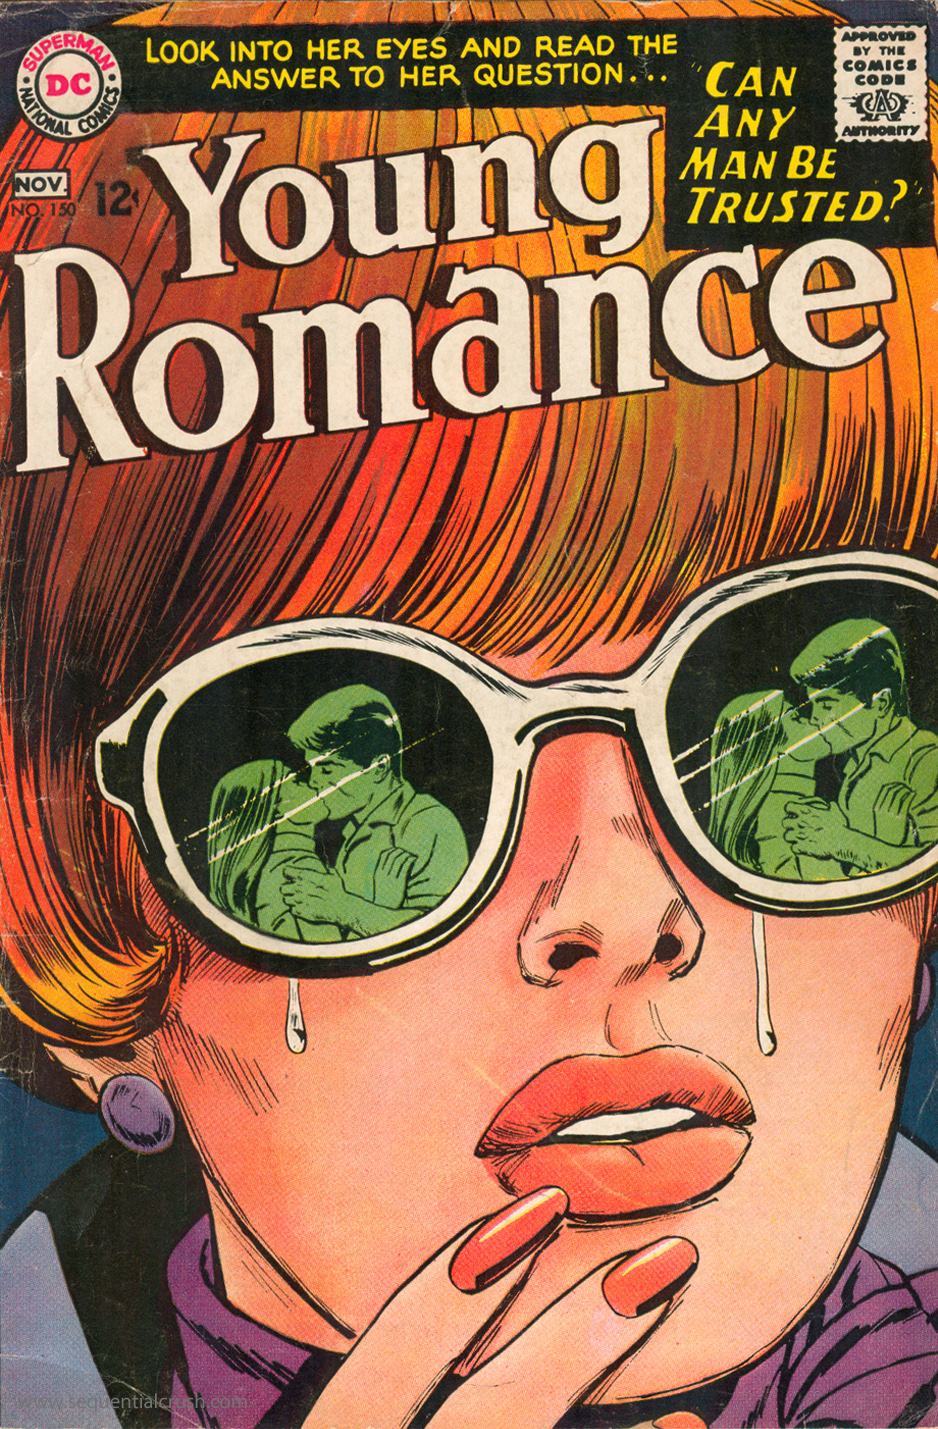 Young Romance #4